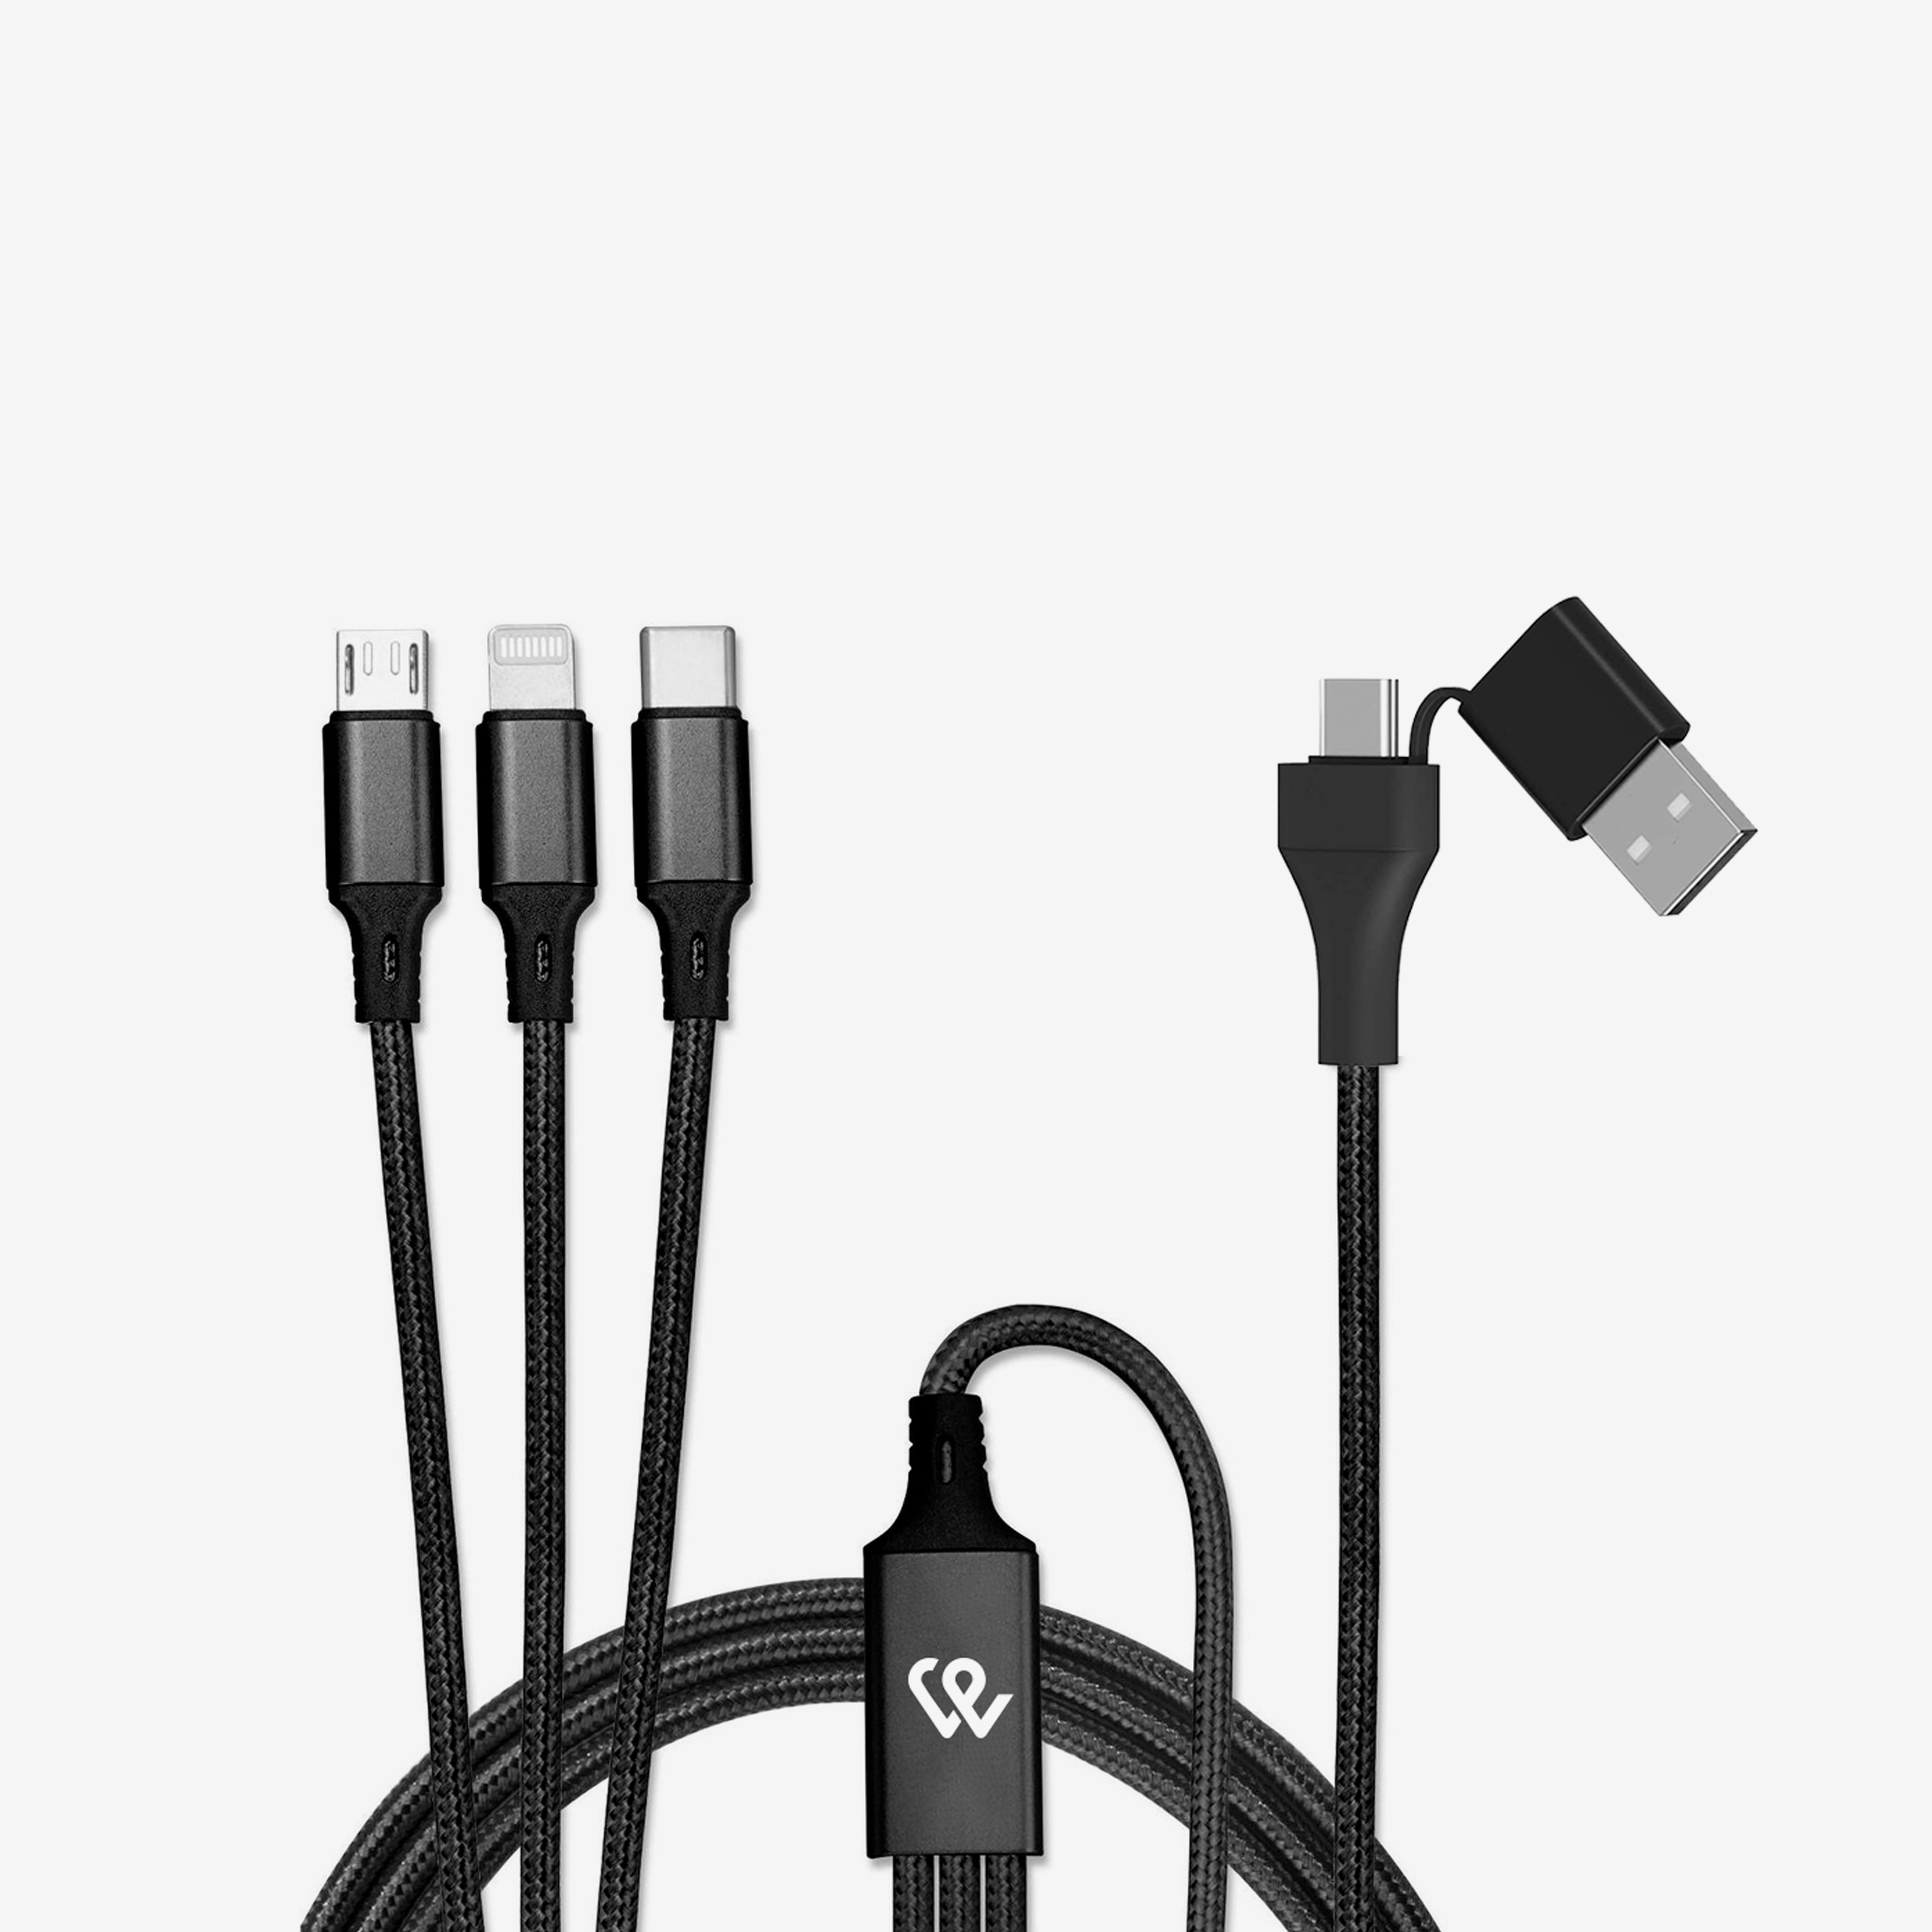 Charging cable 5 in 1